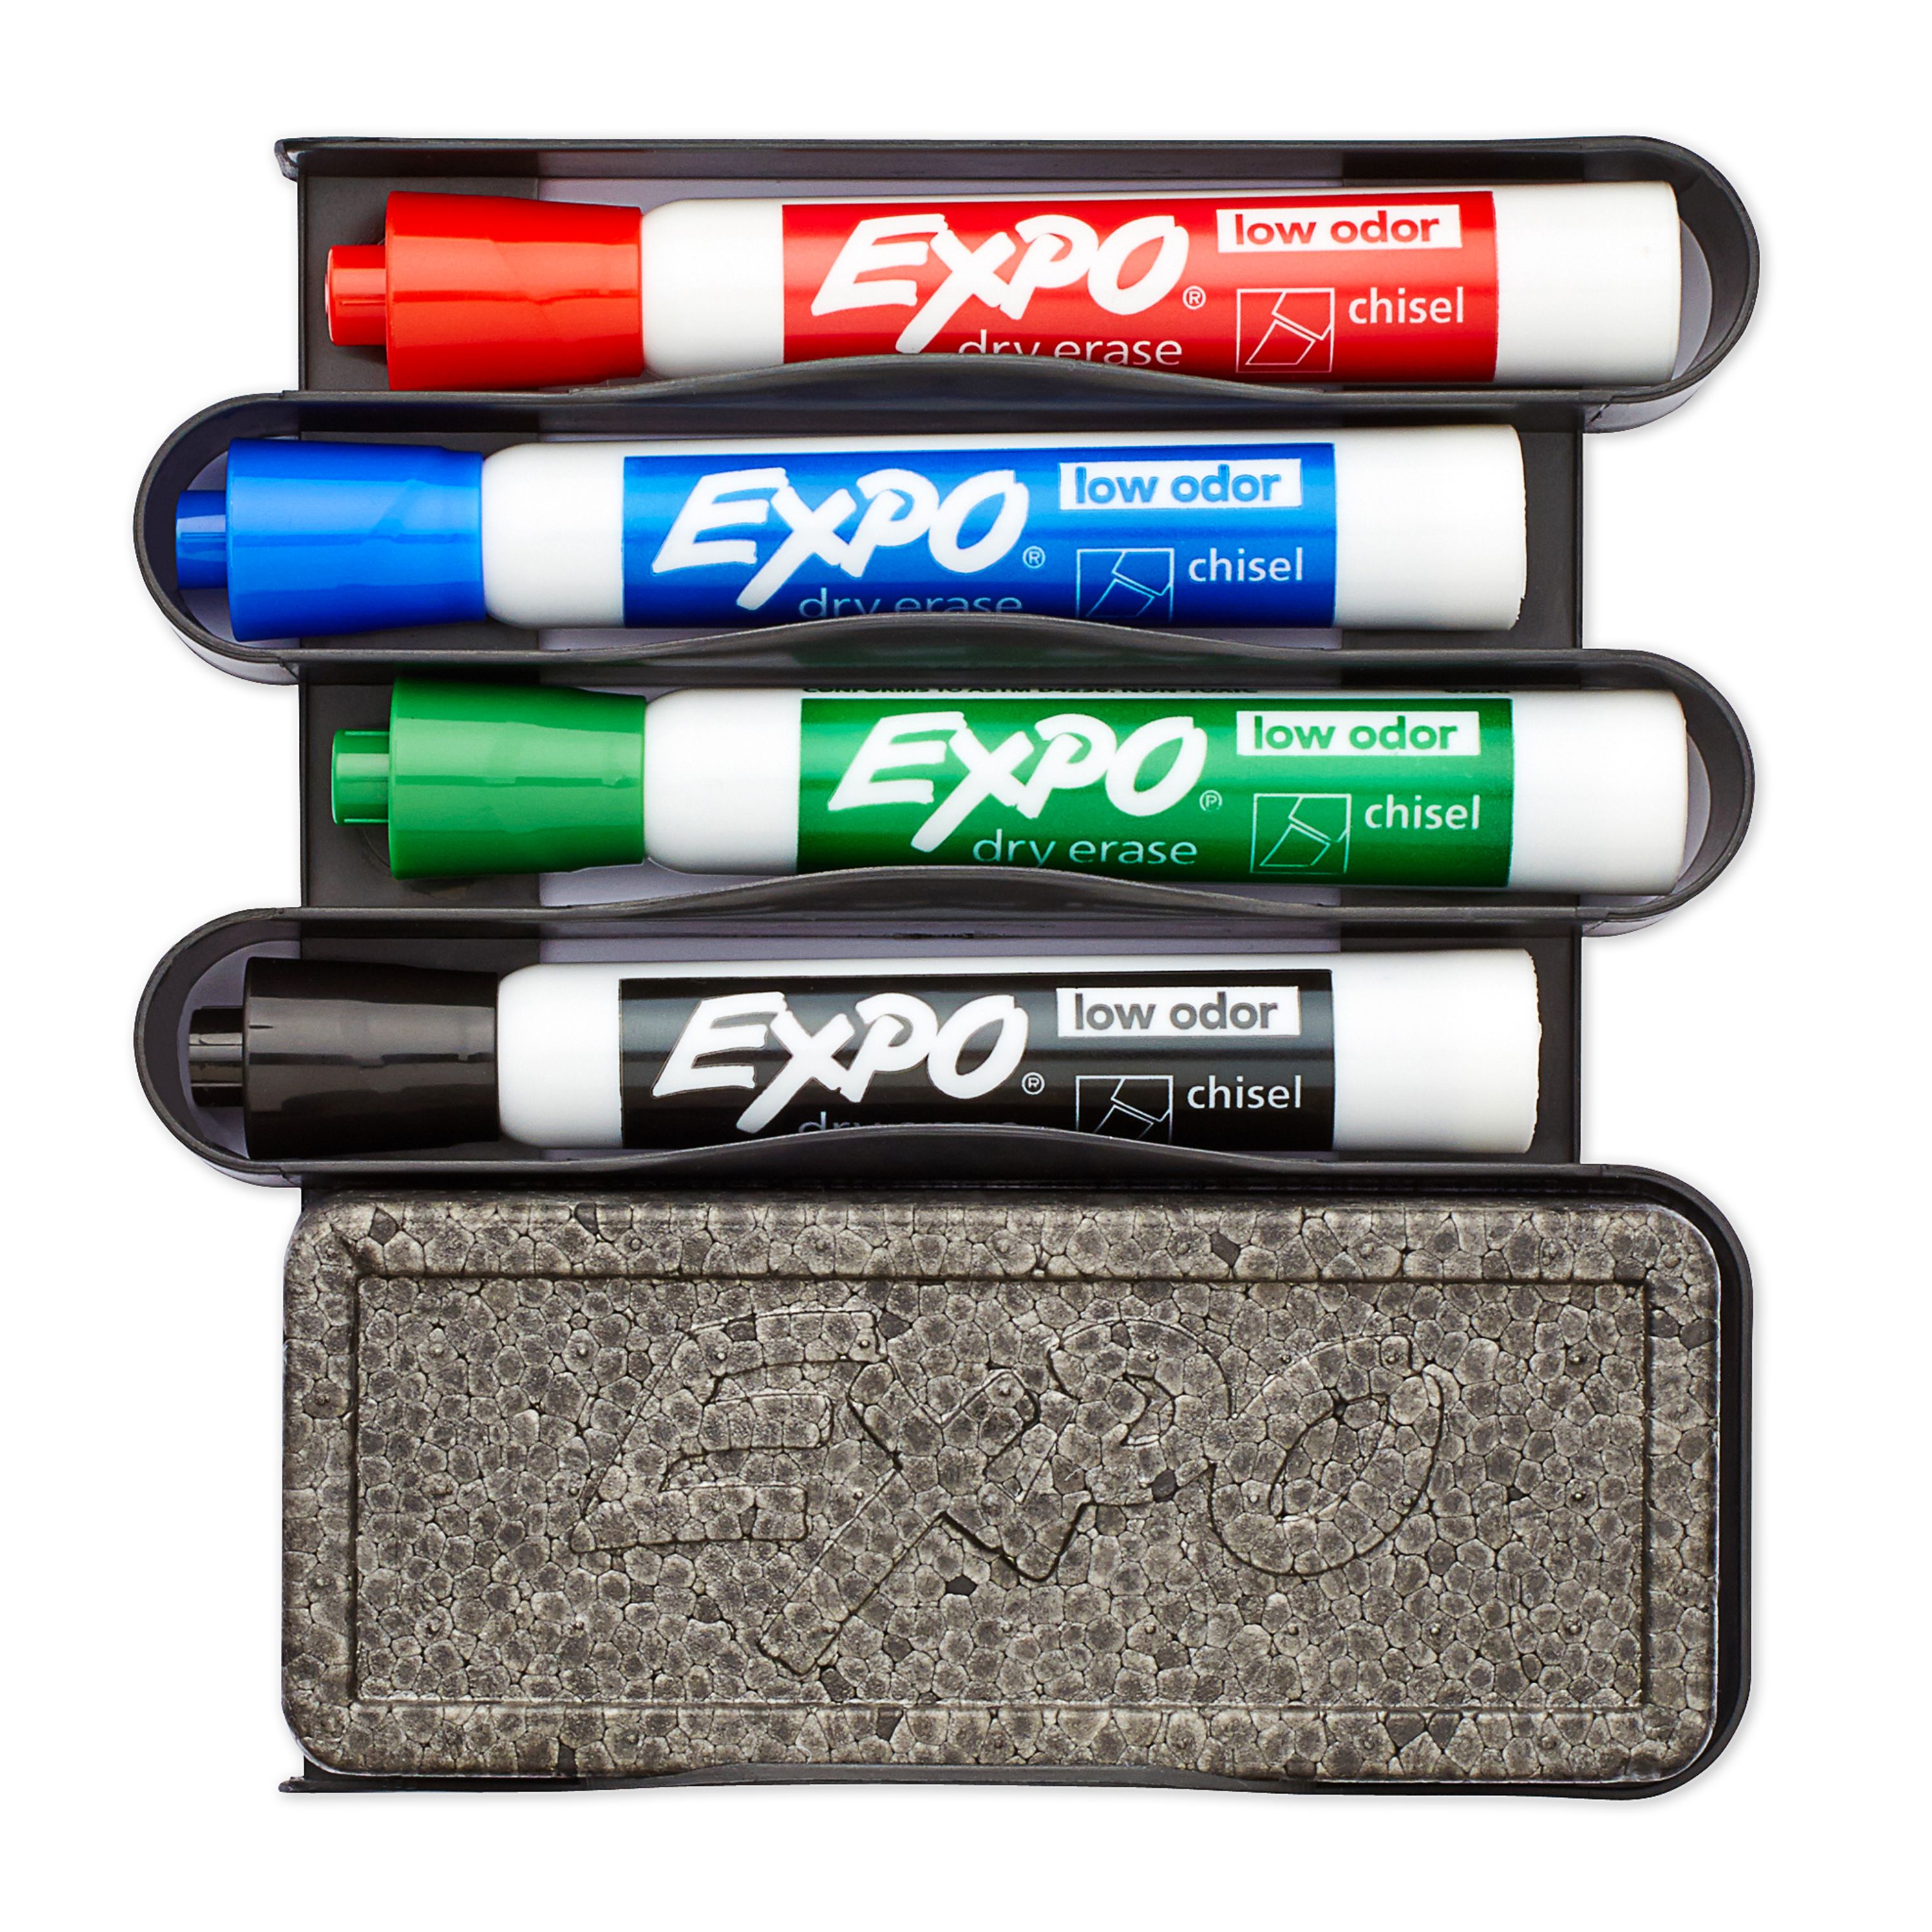 Expo Mountable Whiteboard Caddy with Set of 4 Chisel Markers/Eraser - image 2 of 5